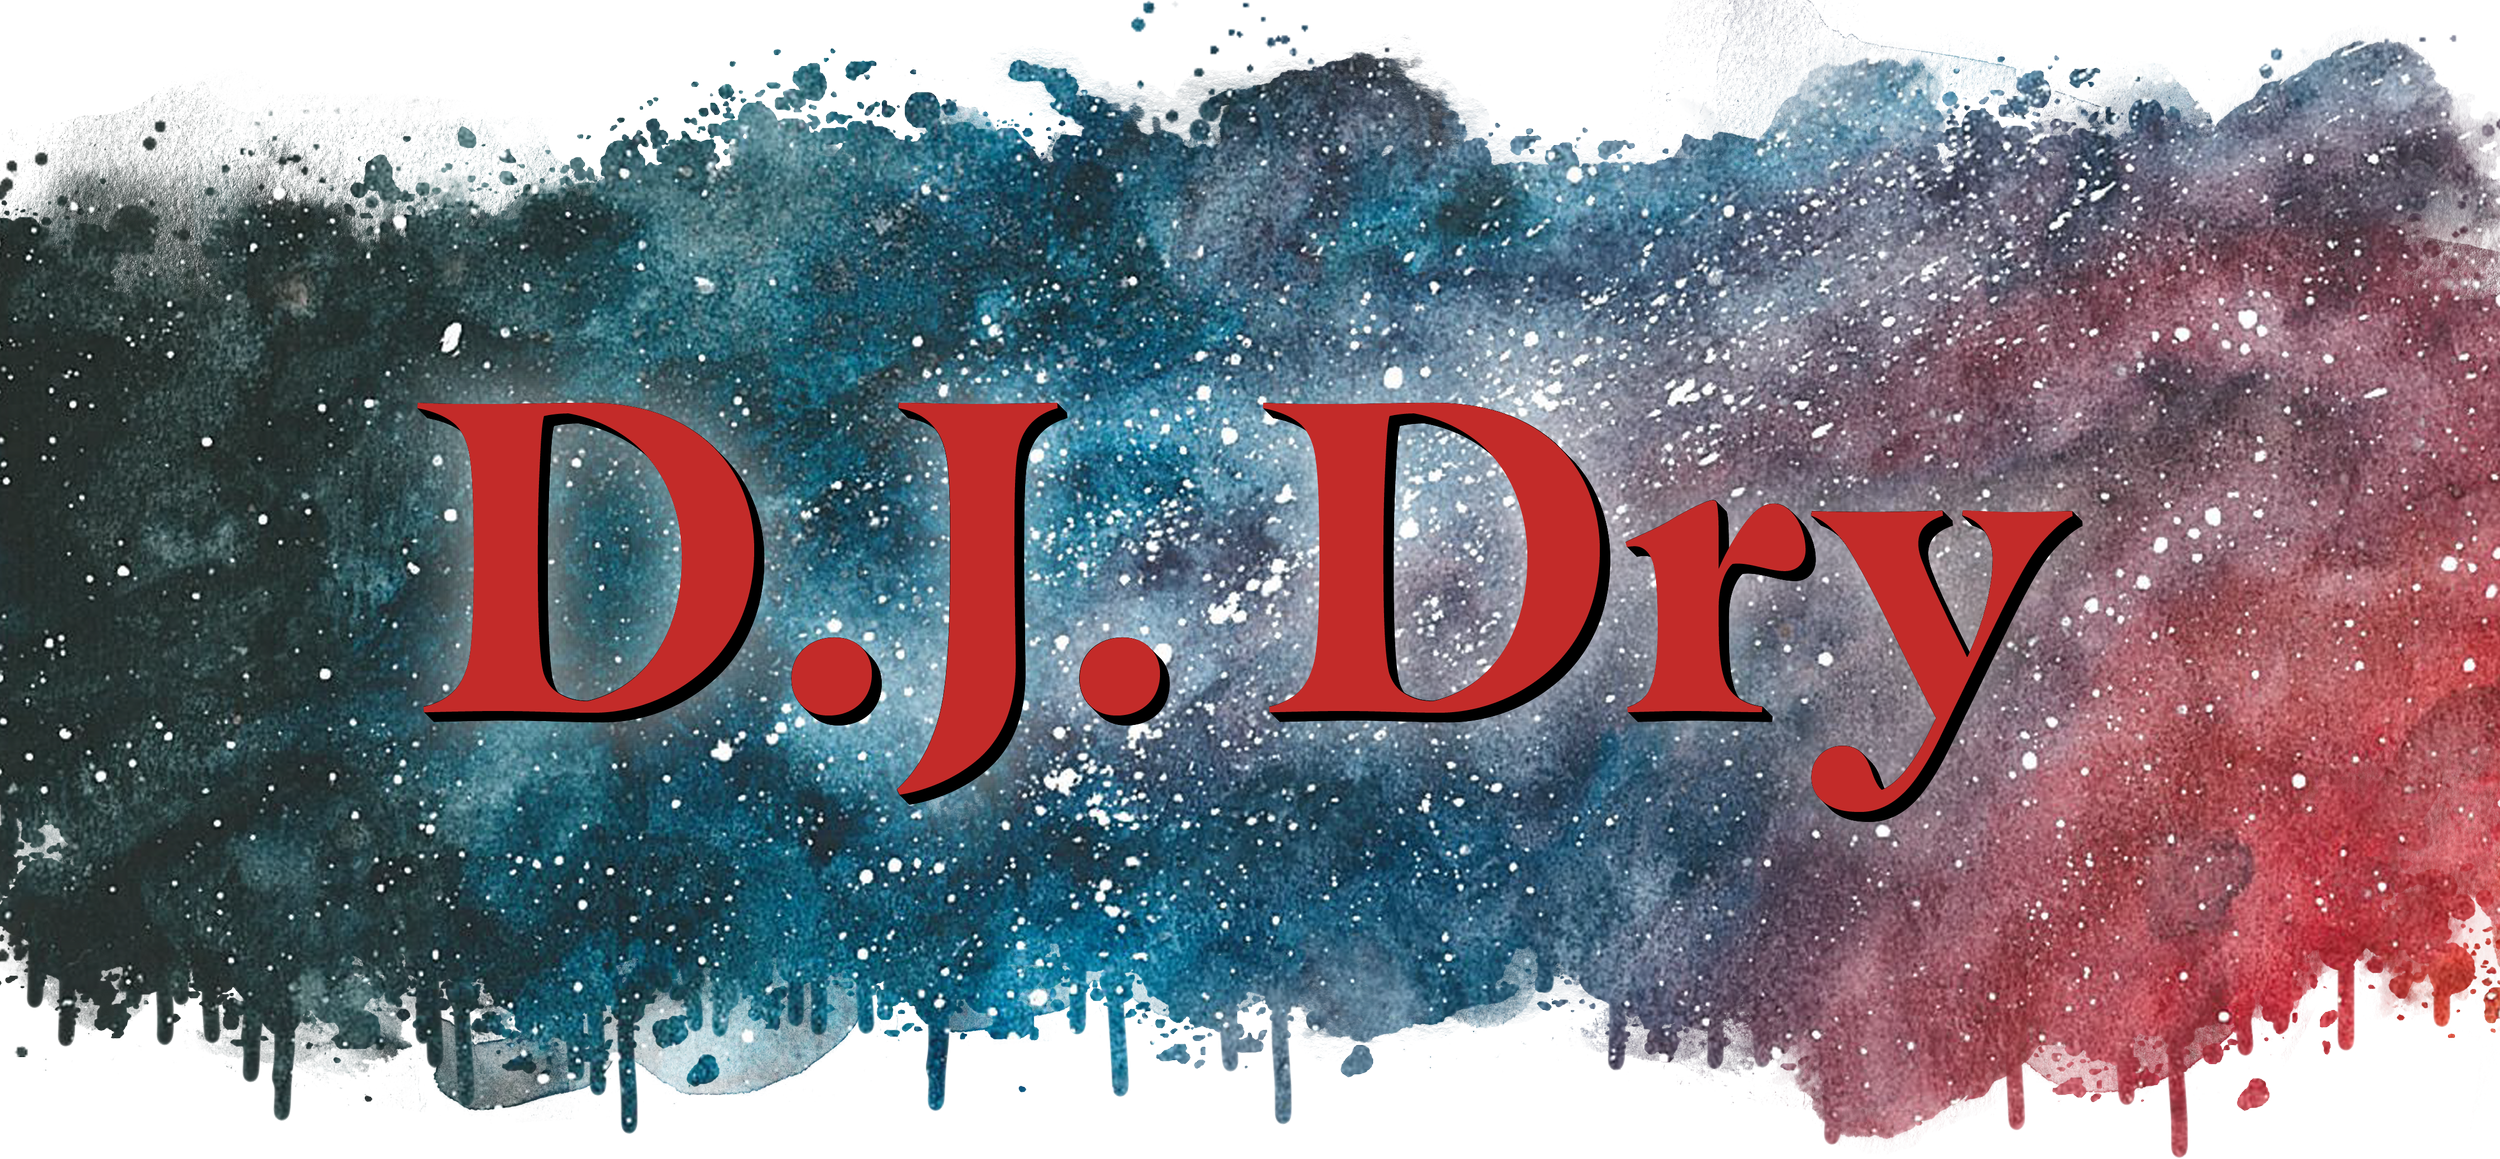 PAINTBANNER_DJDry.png